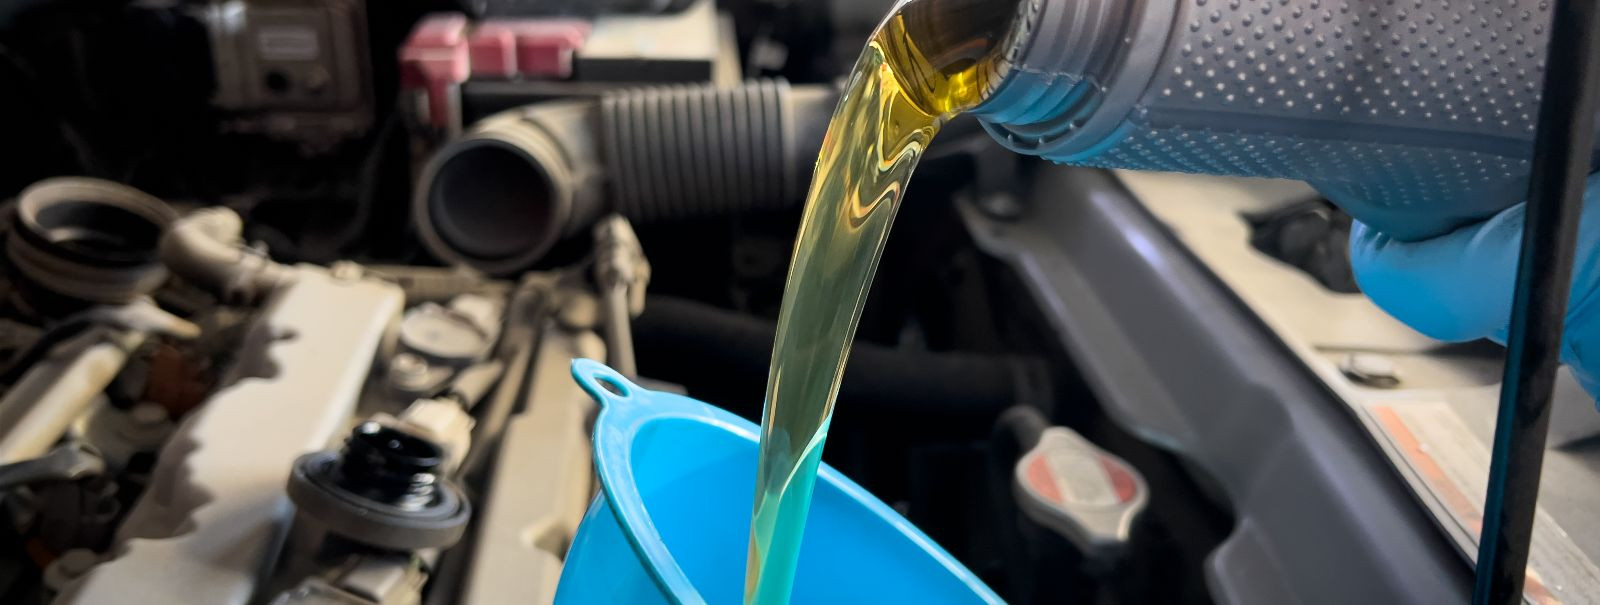 Engine oil is the lifeblood of your vehicle's engine. It serves as a lubricant, coolant, and cleaning agent, ensuring that the intricate parts of the engine wor